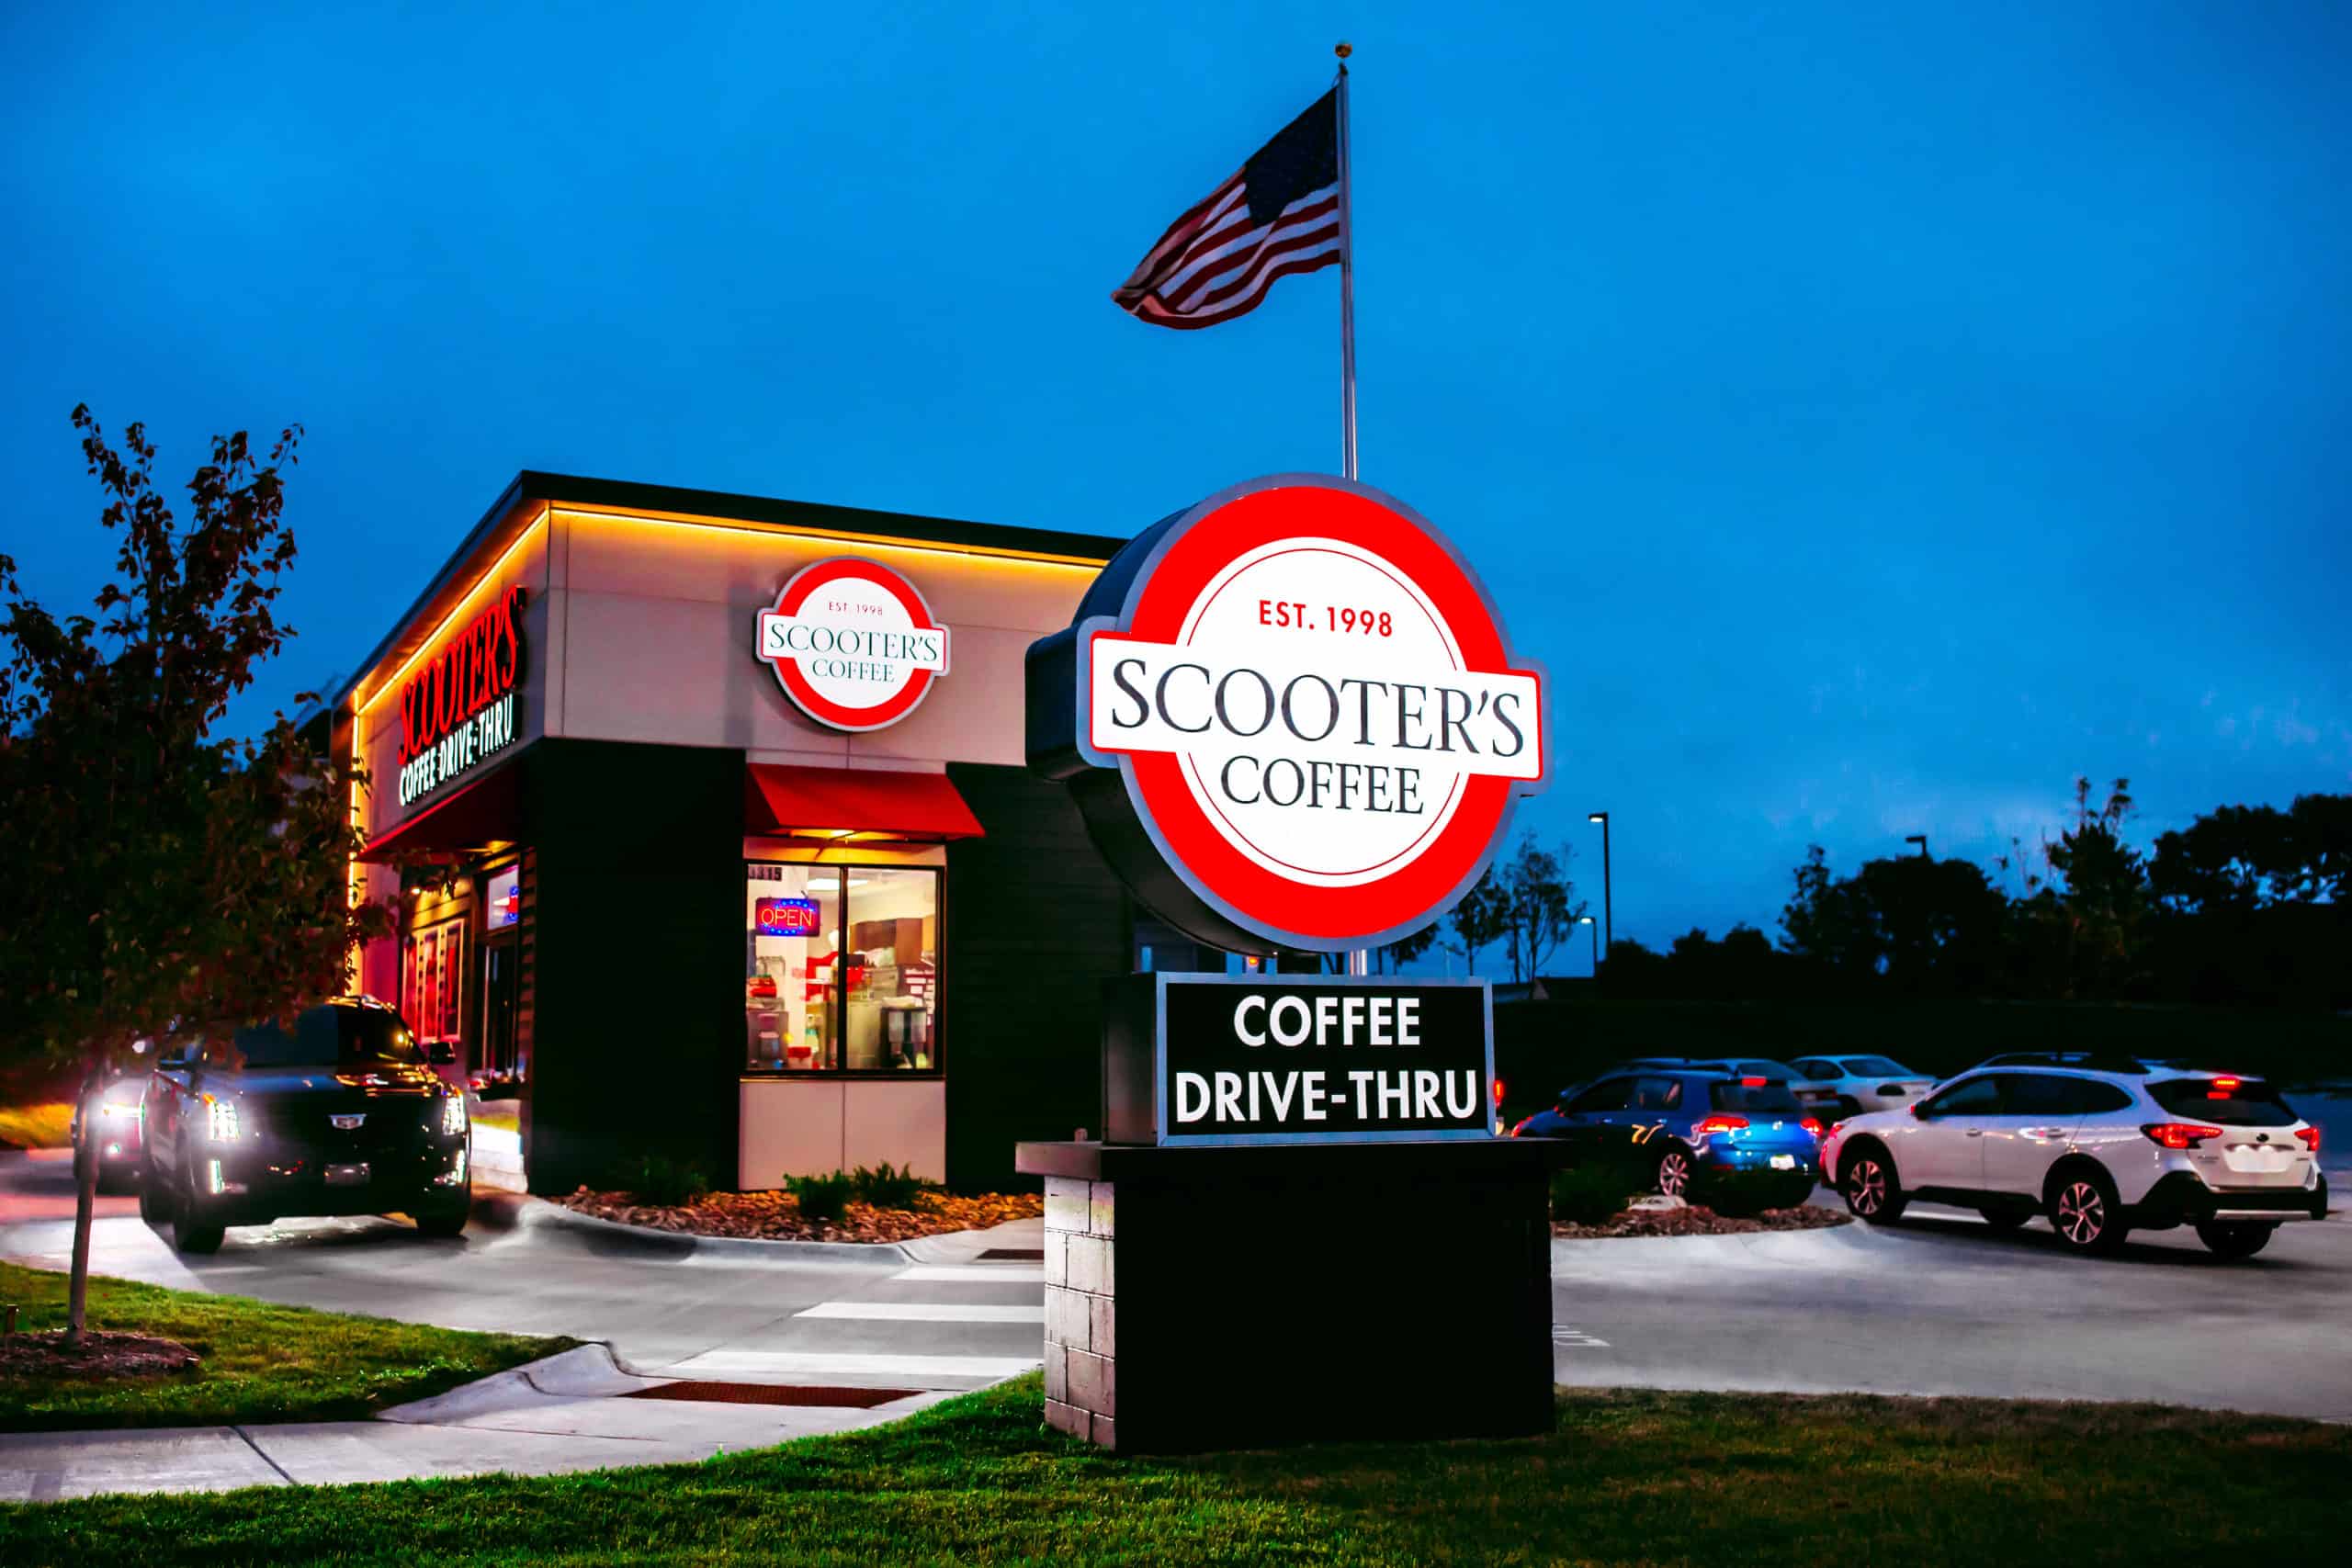 Scooter's Coffee franchise support includes choosing a real estate location.